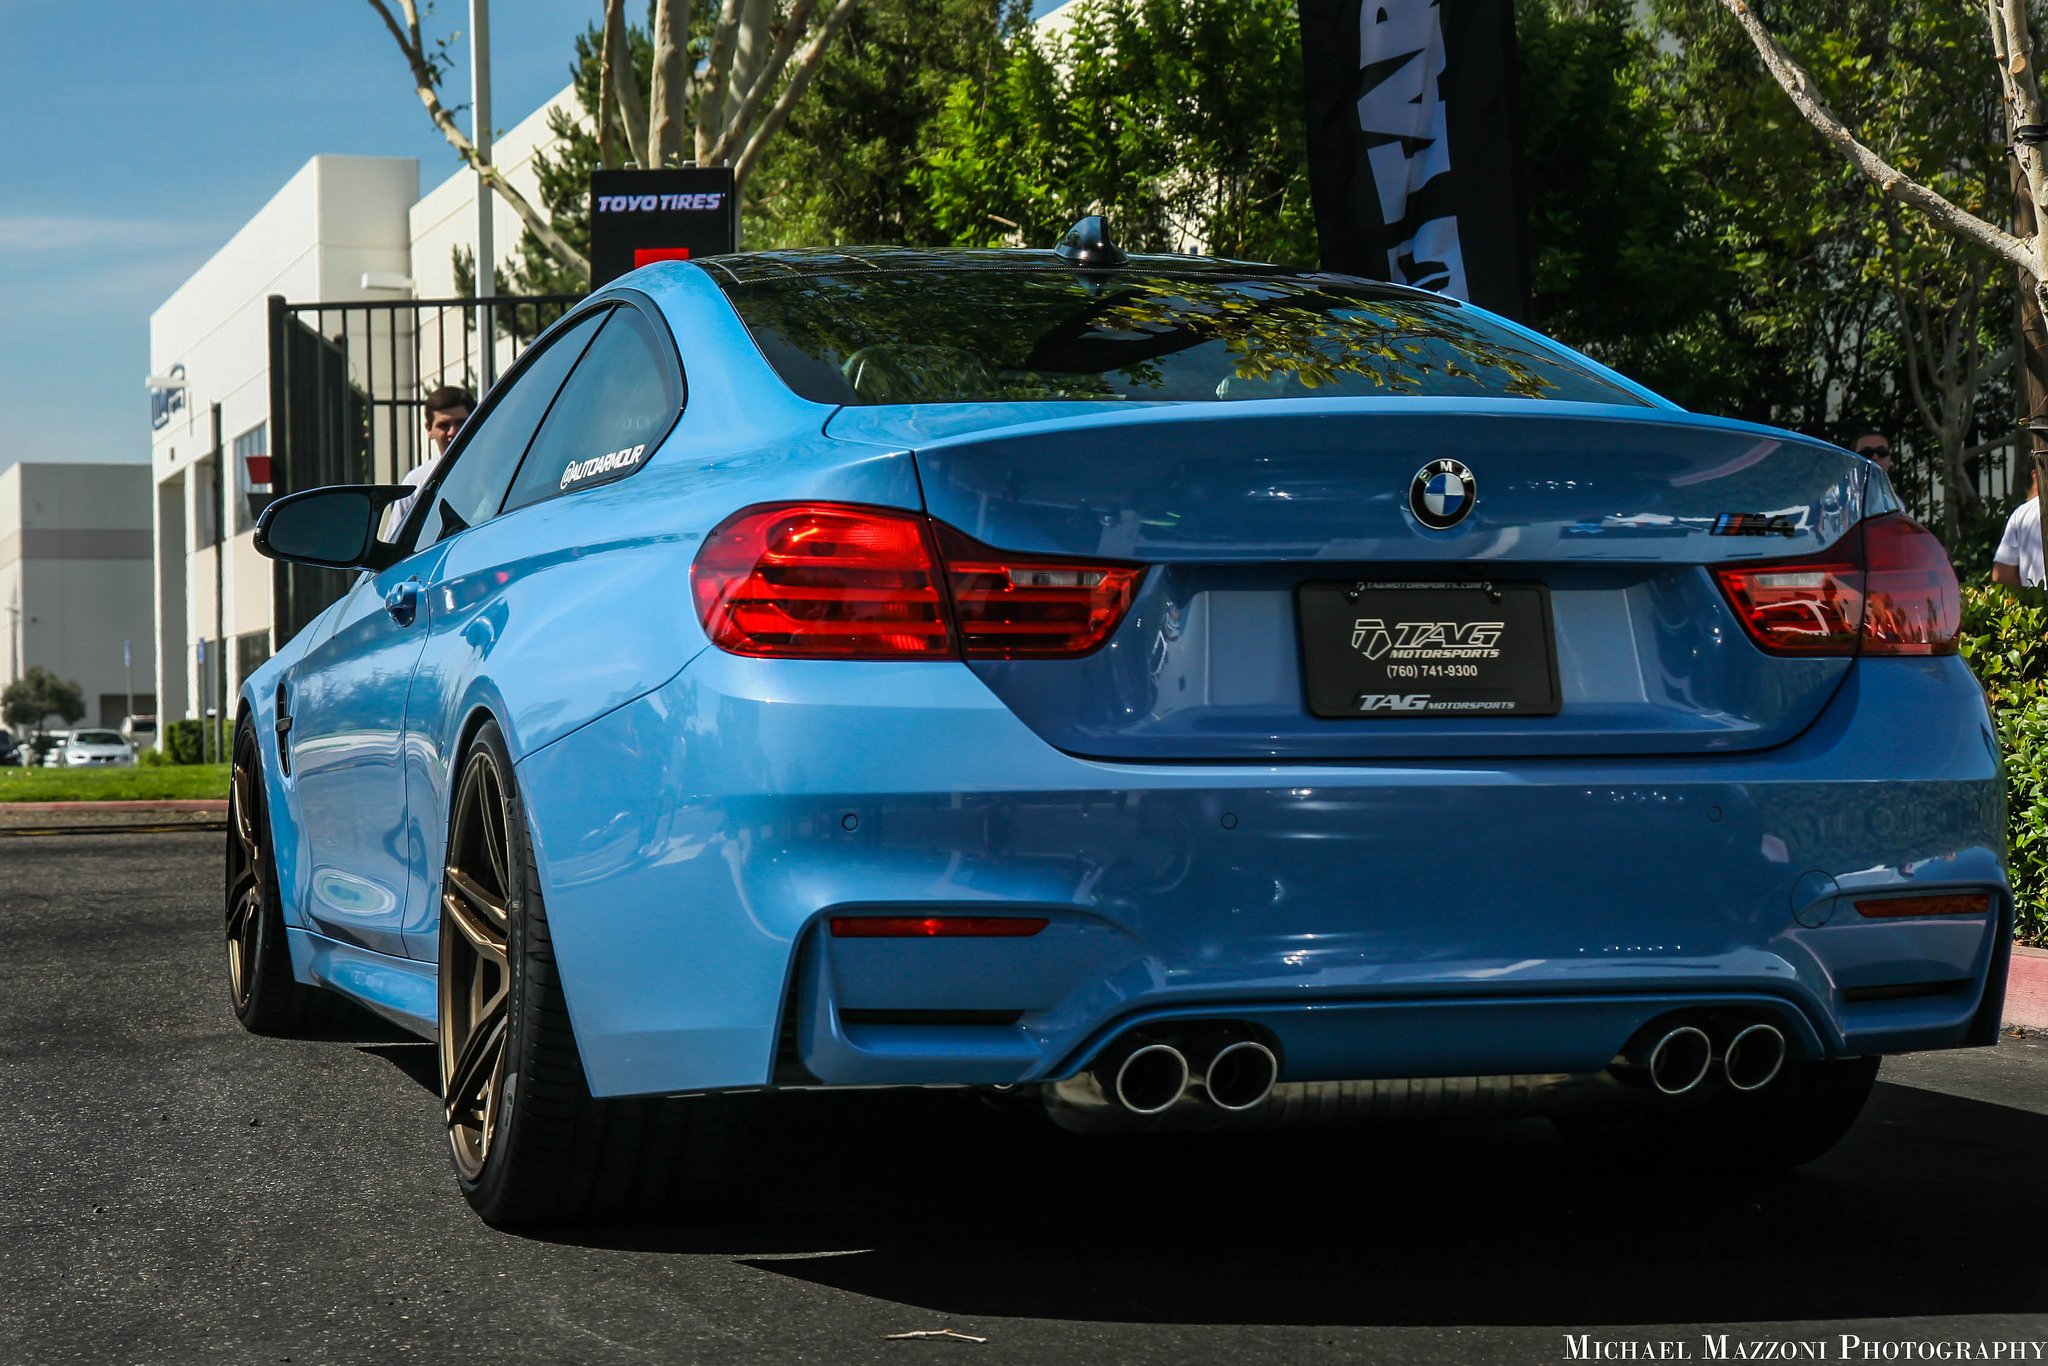 bmw, F82, M, 4, Coupe, Cars, 2014 Wallpaper